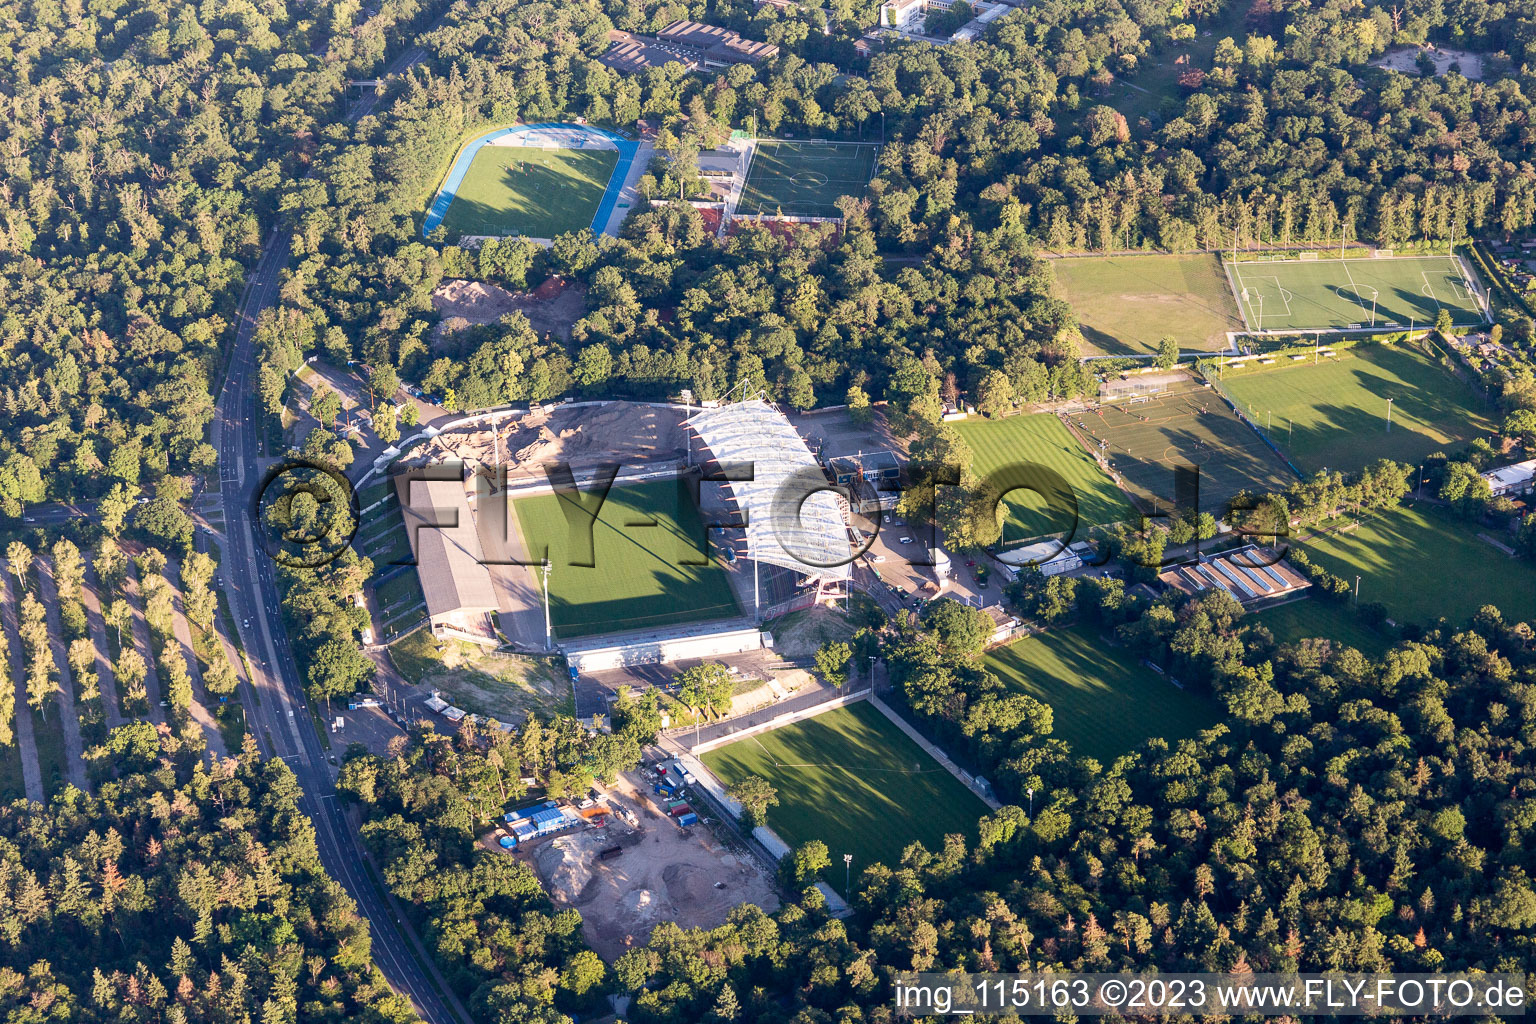 Aerial photograpy of Extension and conversion site on the sports ground of the stadium "Wildparkstadion" of the KSC in Karlsruhe in the state Baden-Wurttemberg, Germany